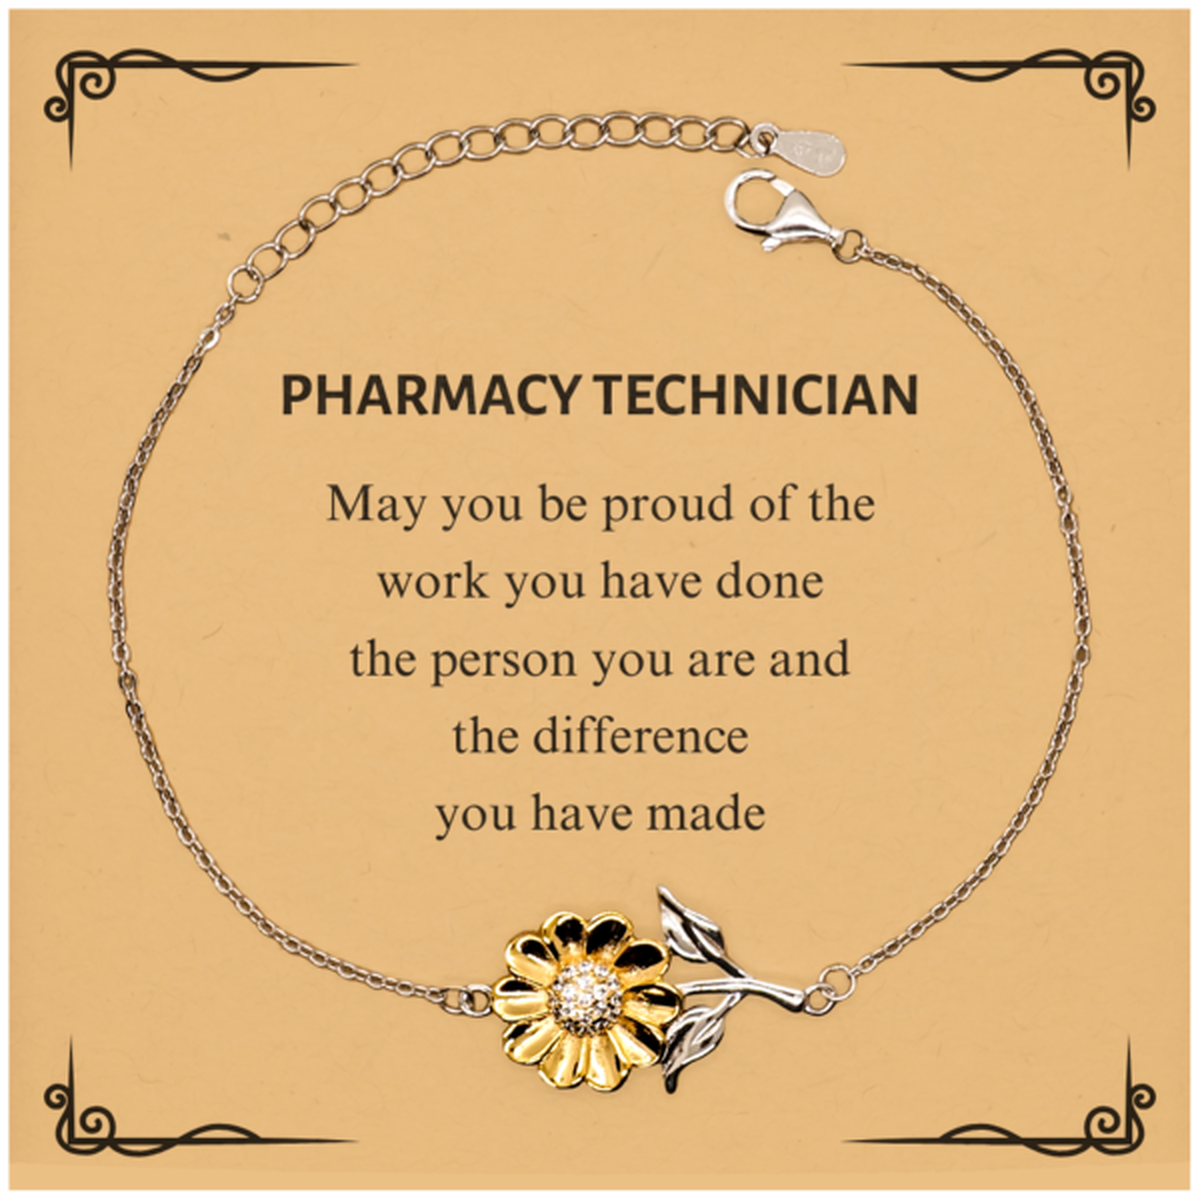 Pharmacy Technician May you be proud of the work you have done, Retirement Pharmacy Technician Sunflower Bracelet for Colleague Appreciation Gifts Amazing for Pharmacy Technician